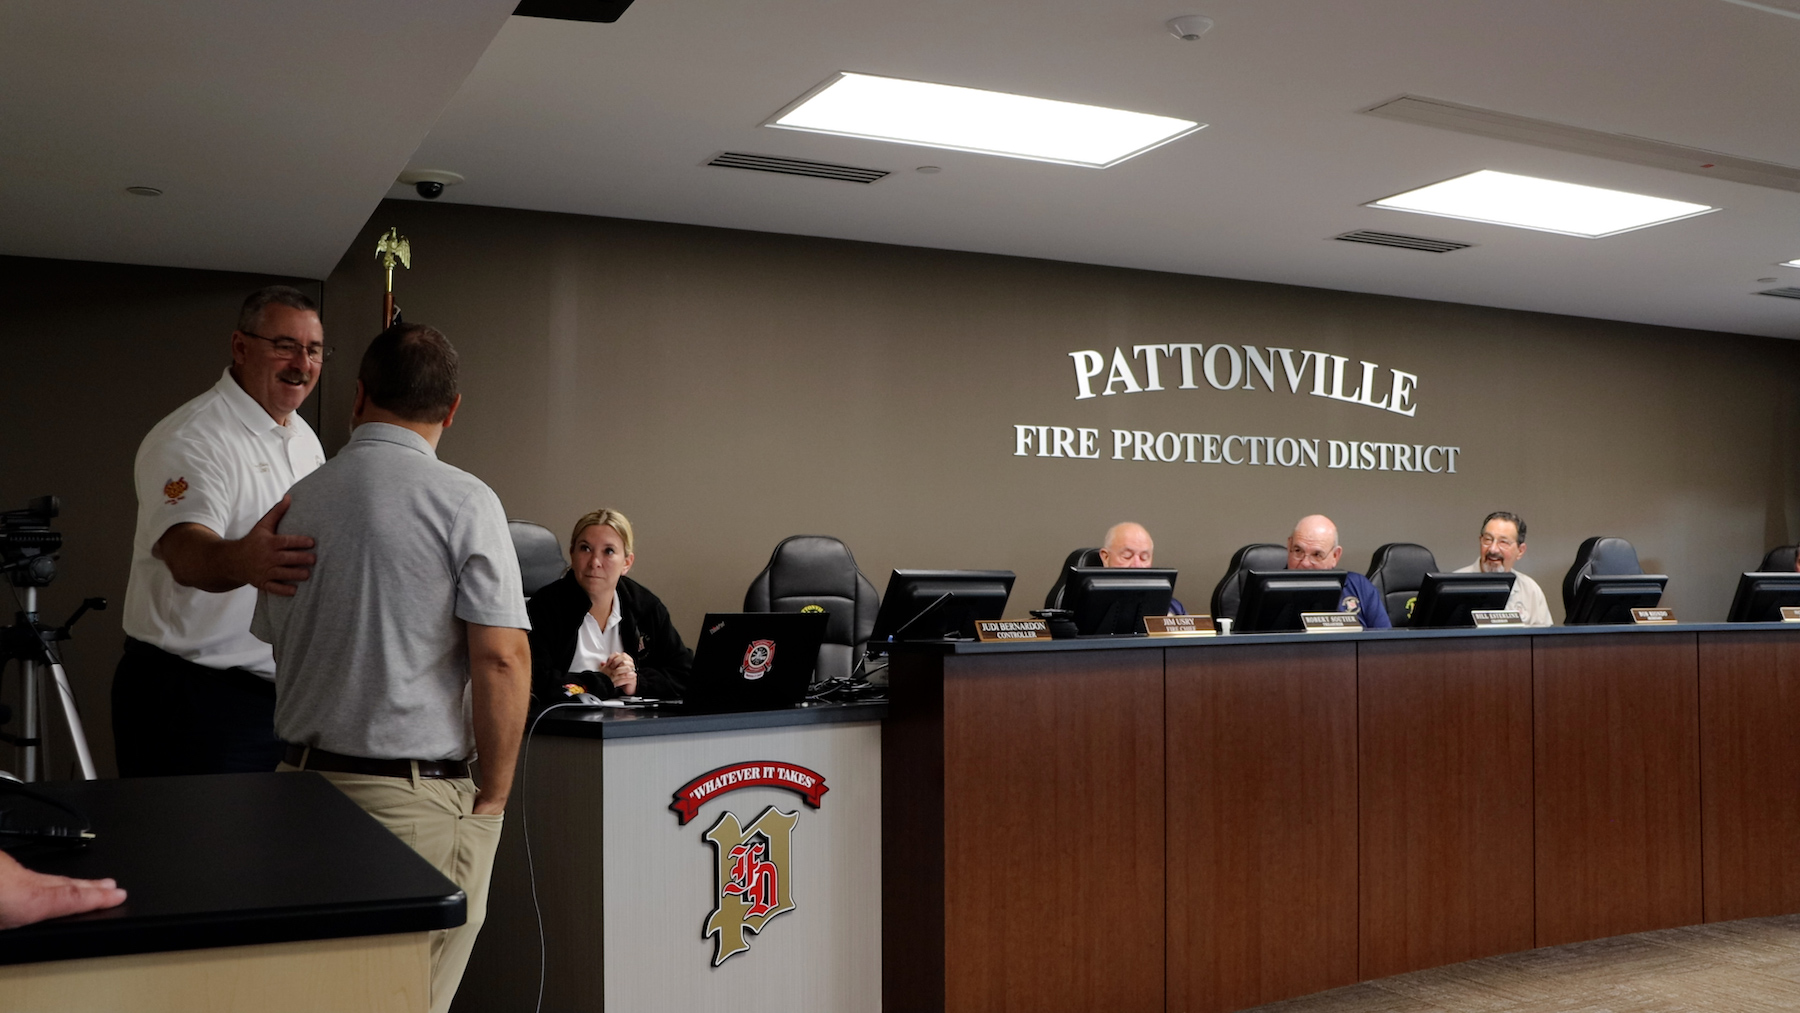 Jim Usry, Fire Chief of Pattonville Fire Department, along with other Board members of the Fire Protection District, along with Roland Thomas, CFO of FSI